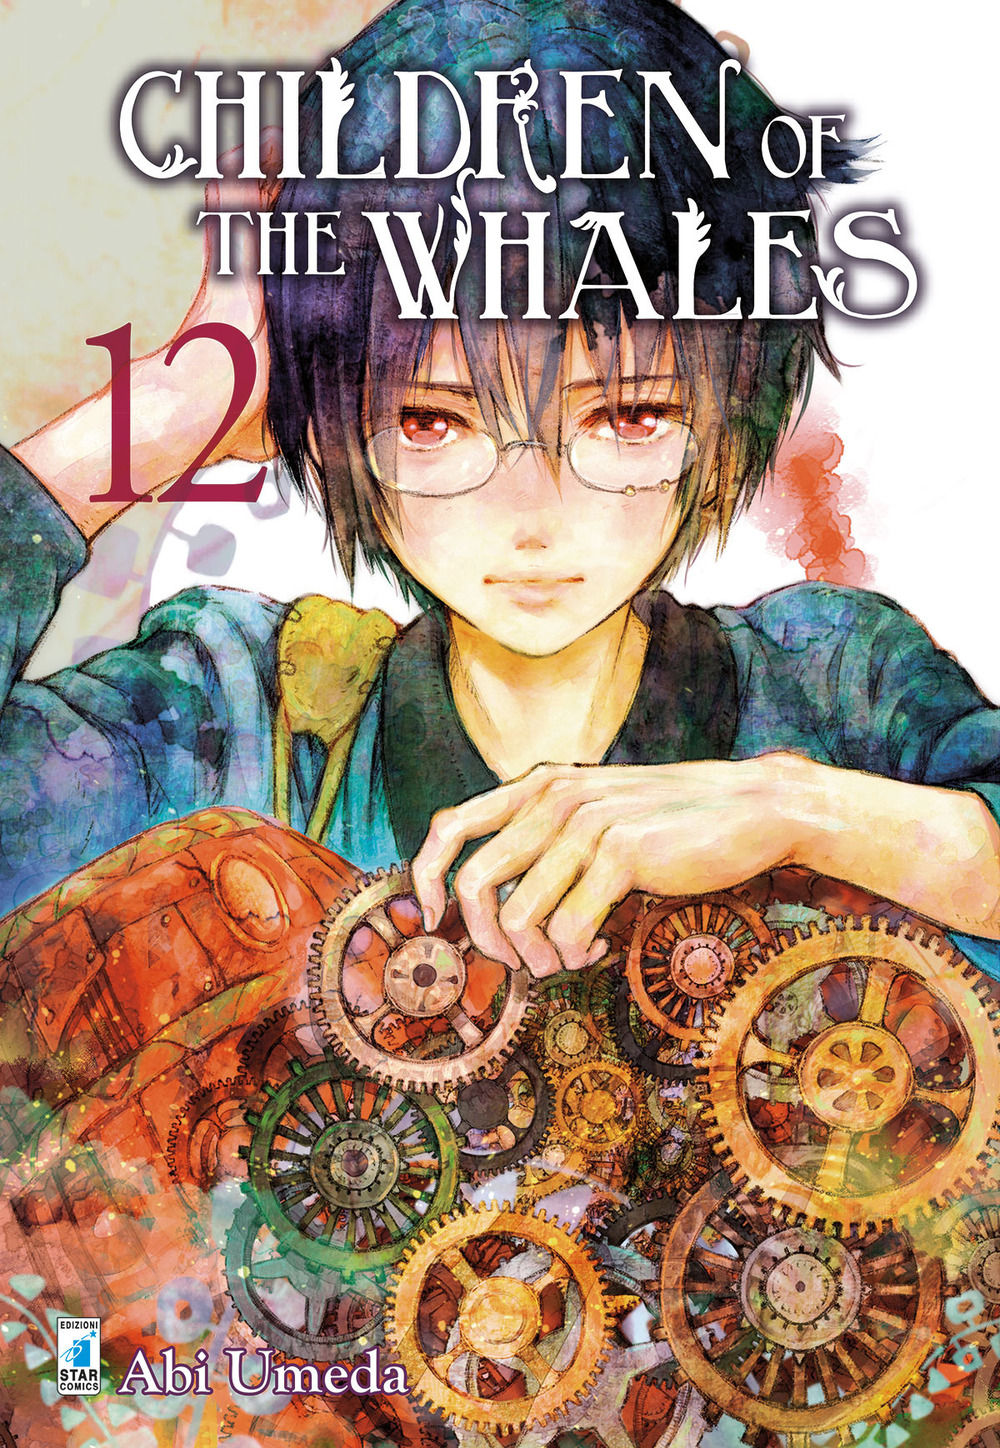 Children of the whales. Vol. 12